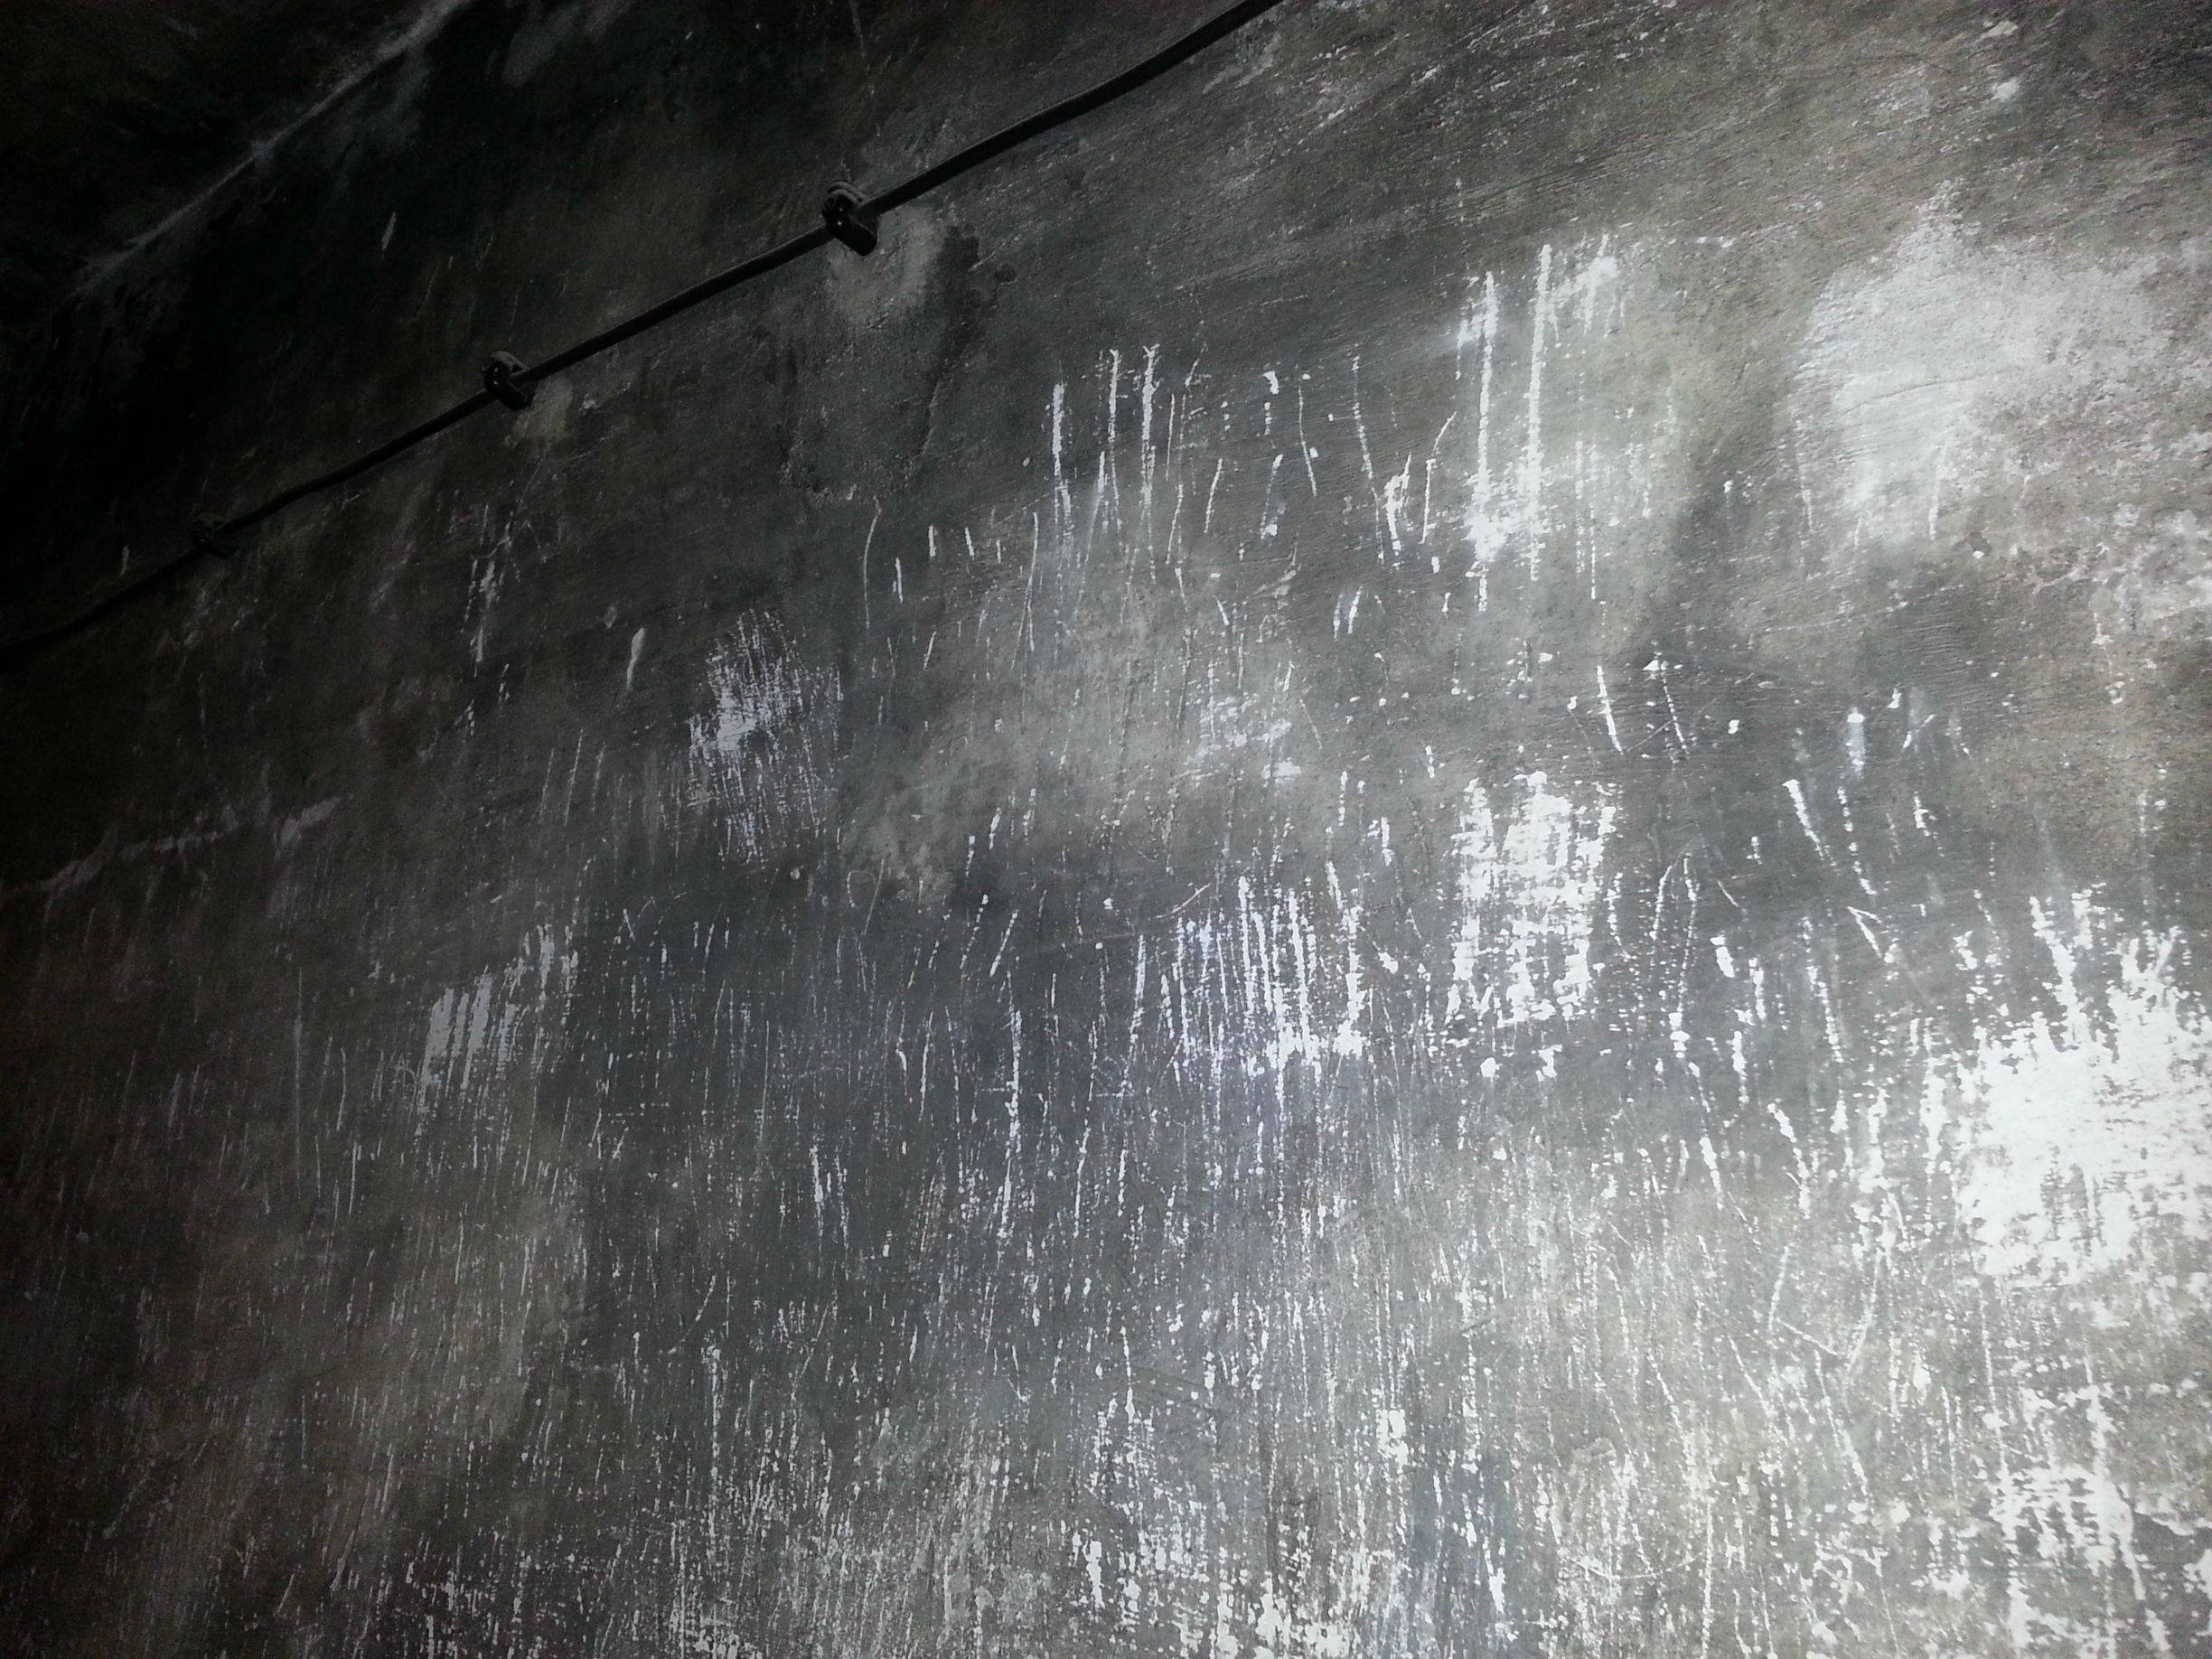 gas chamber scratch marks